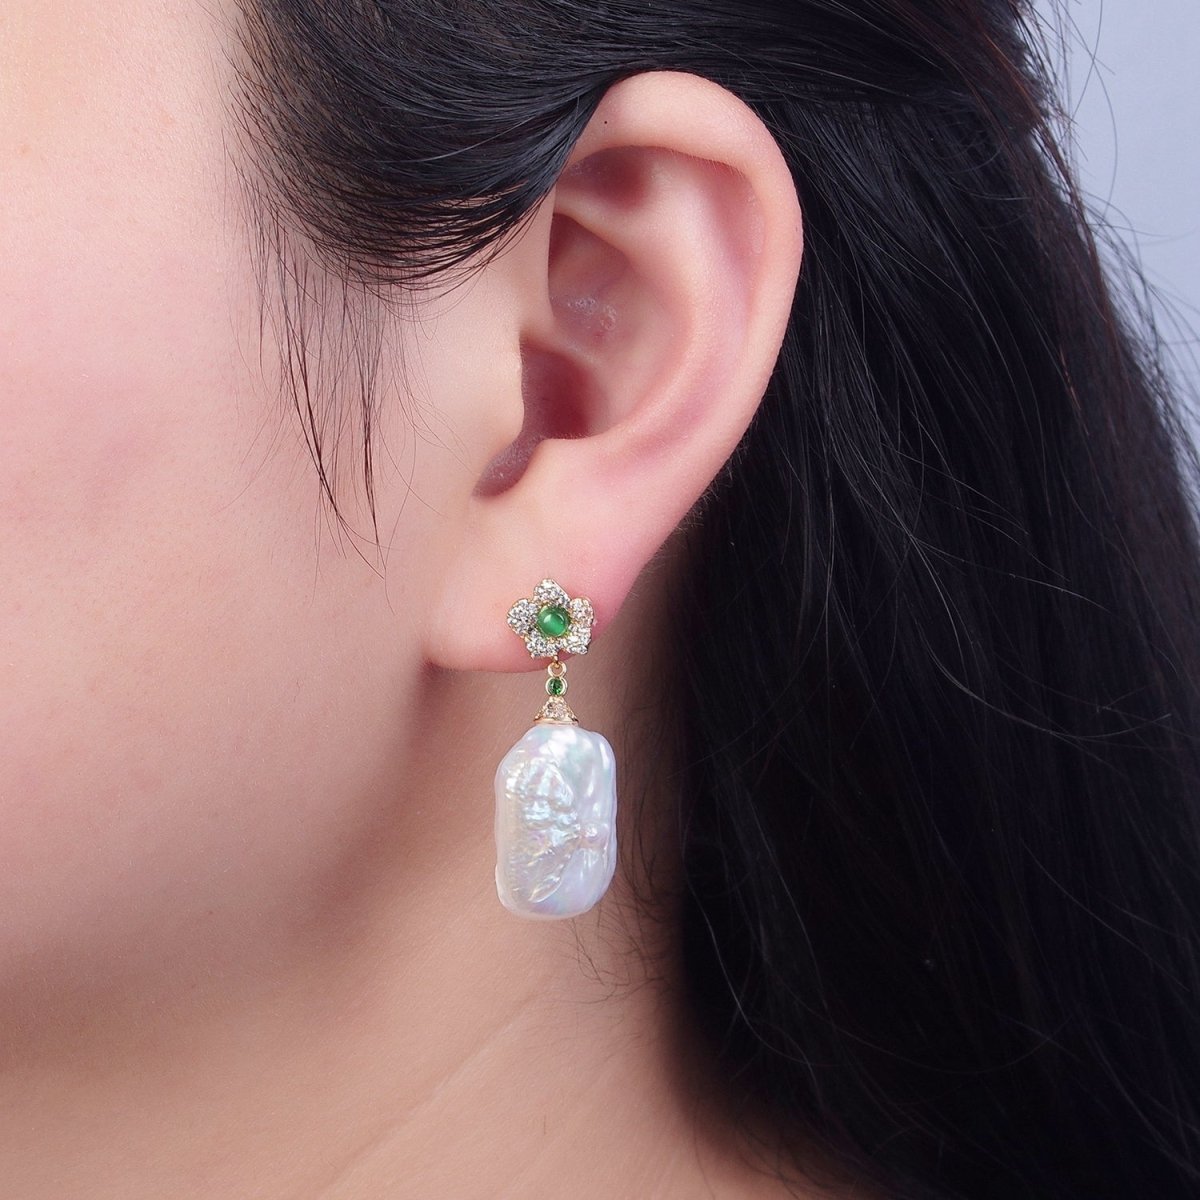 Large Baroque Pearl Stud Earring with Pave Green Flower for Wedding Jewelry T-530 - DLUXCA